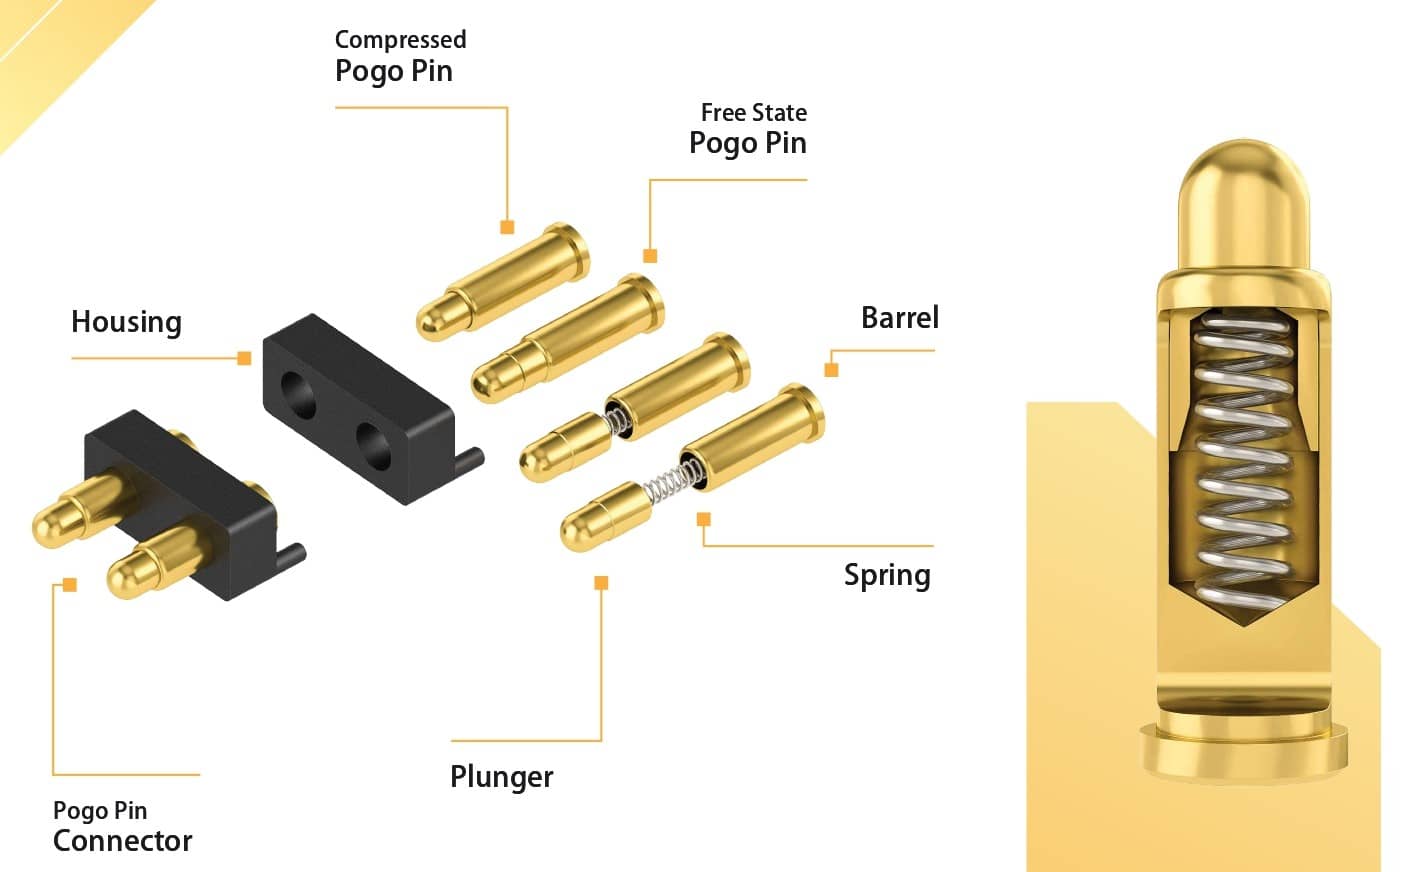 Pogo pin structure